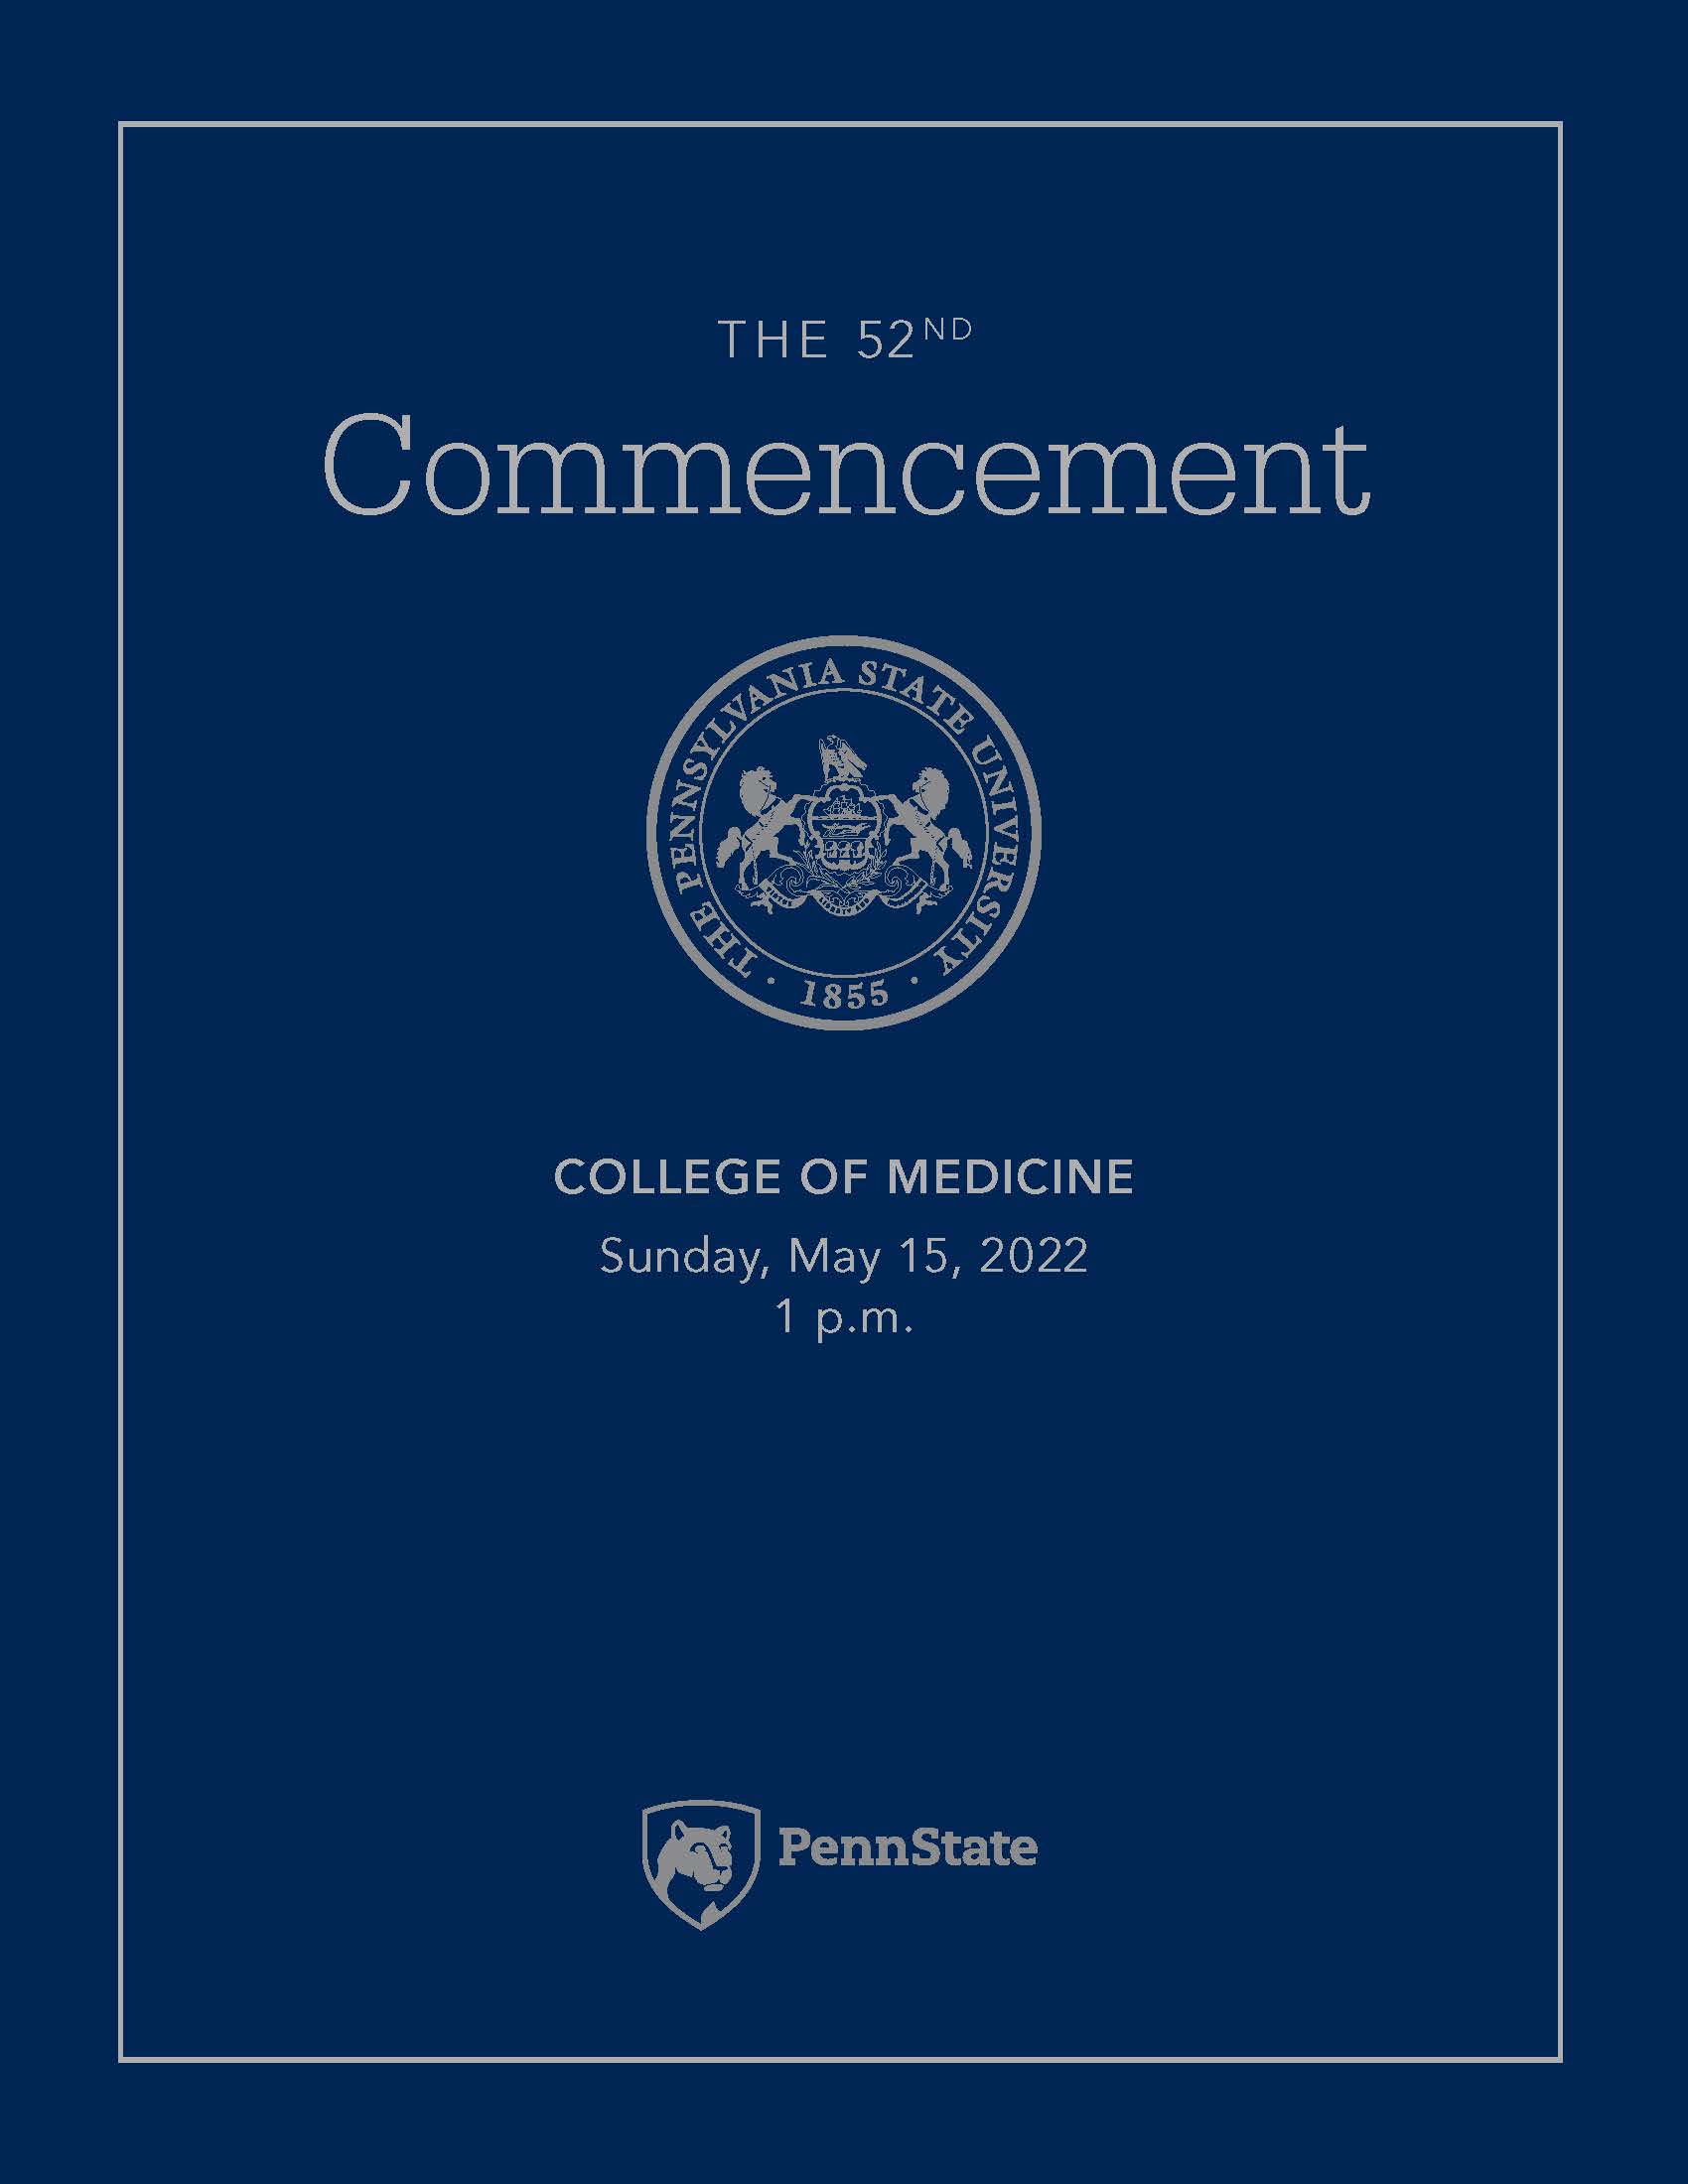 The cover of the 2022 Penn State College of Medicine Commencement Program shows the ceremony name and date.